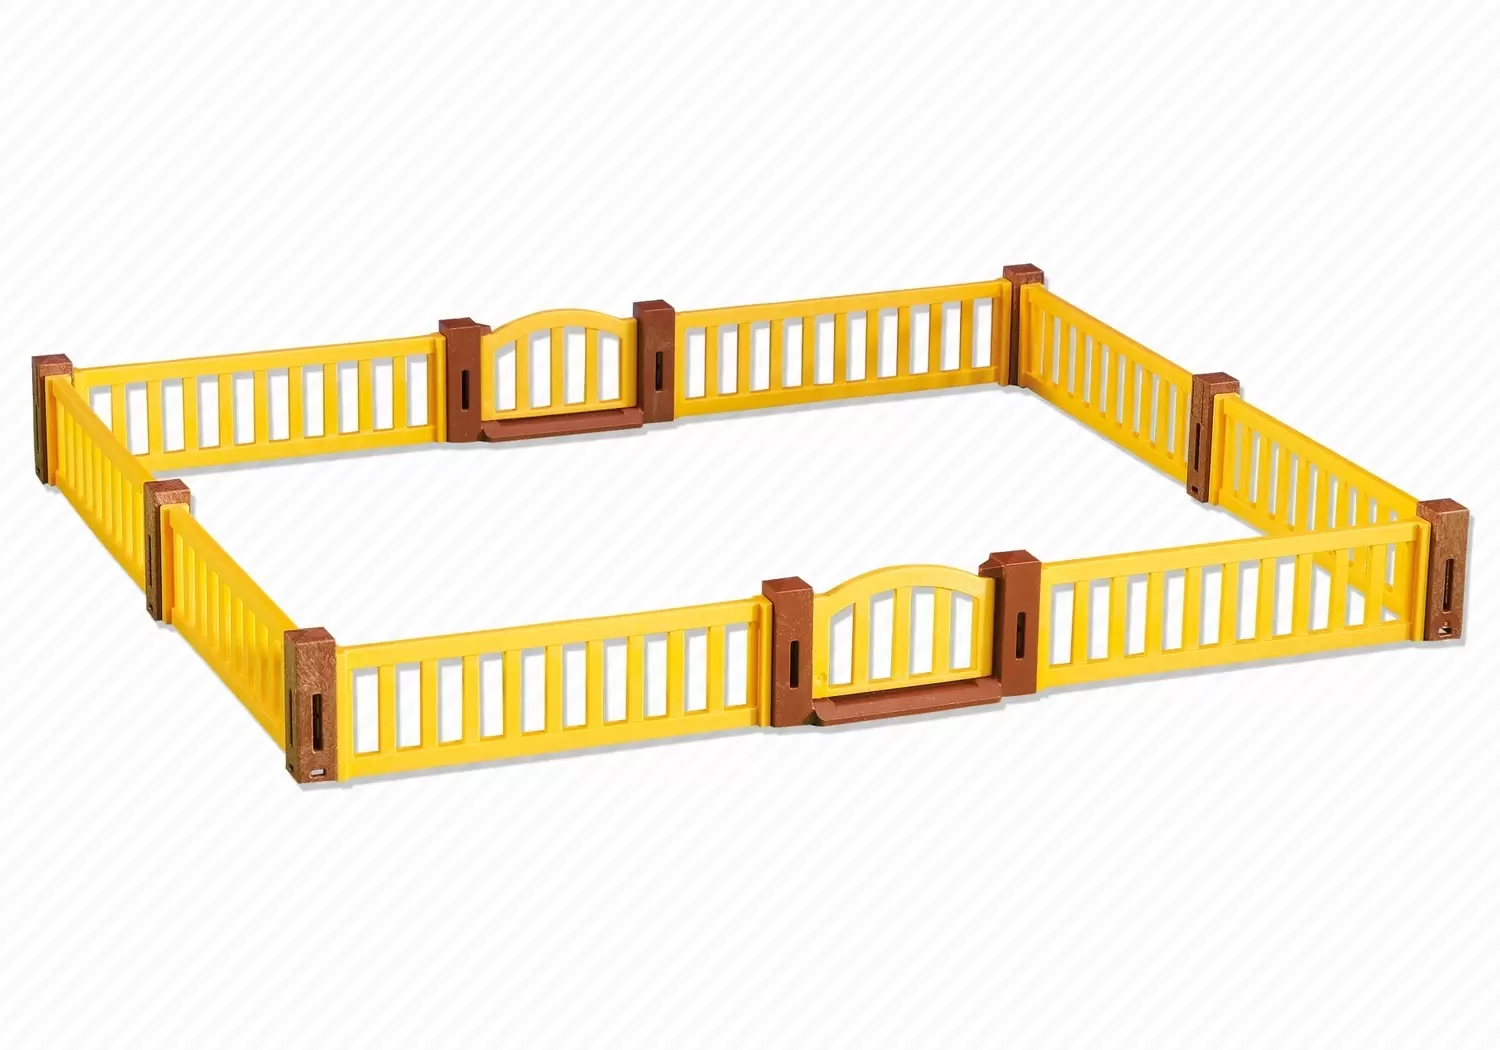 Playmobil Farmers - Fence Extension for Large Farm (6120)